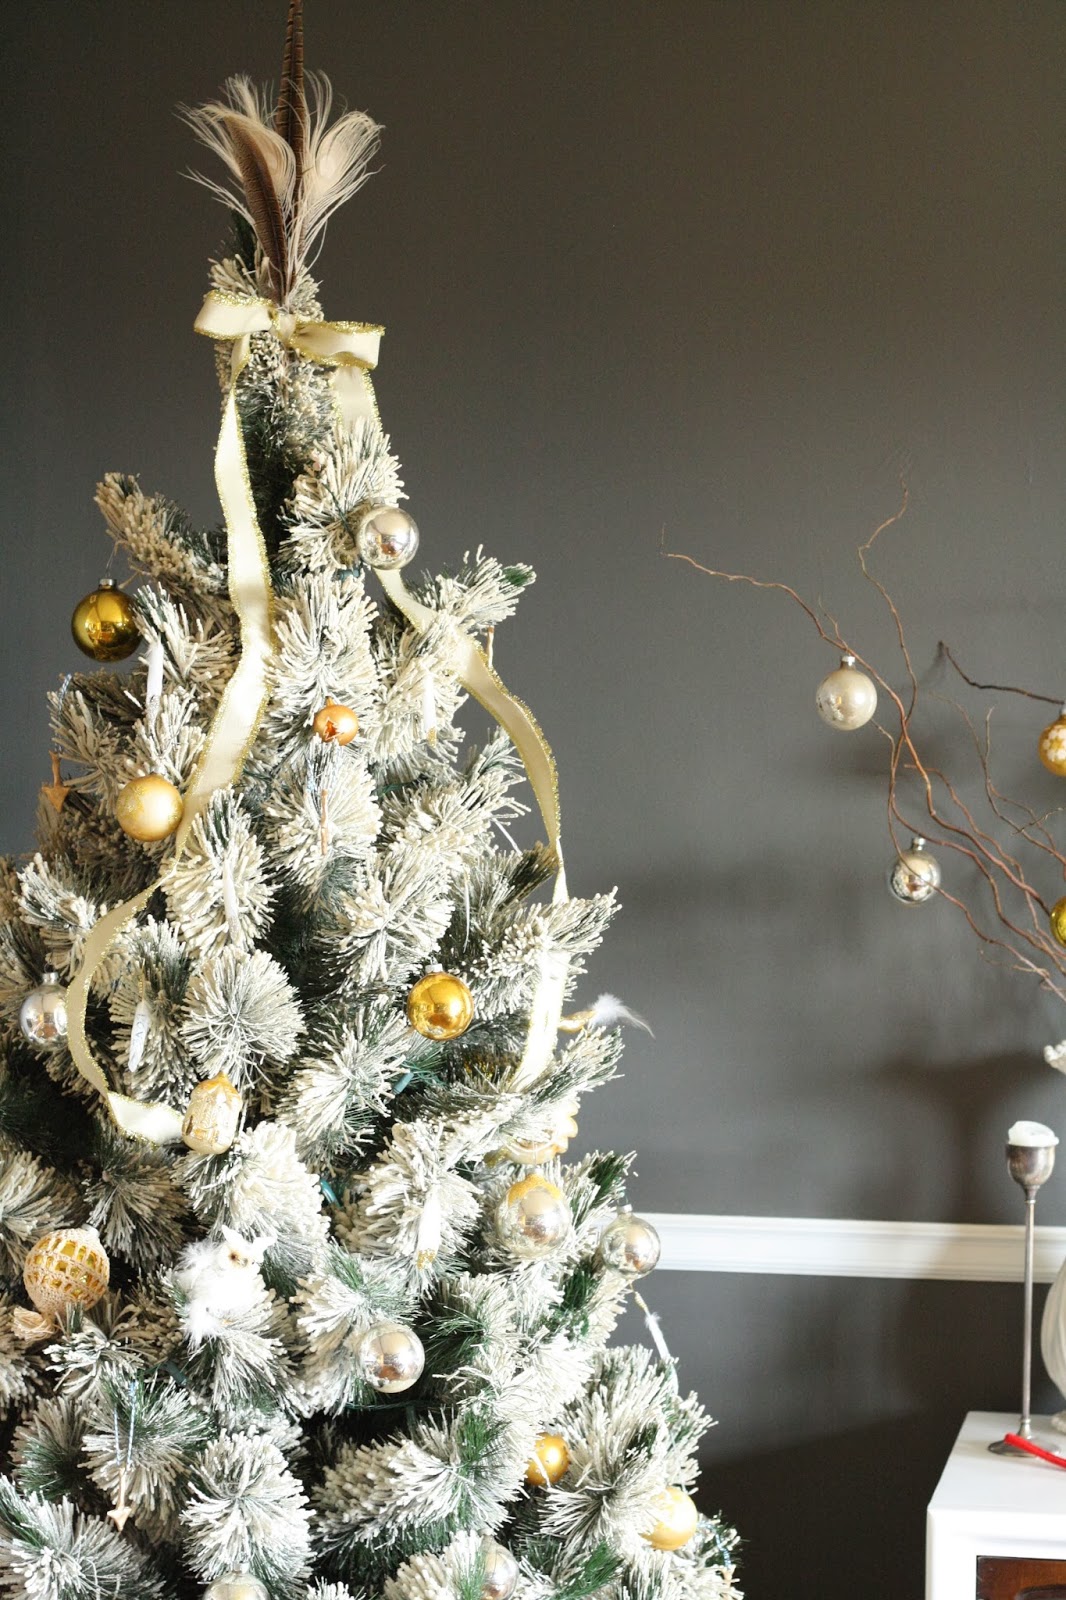 Gilded Silver Metallic Feather Trees - Christmas, Fall Decorative